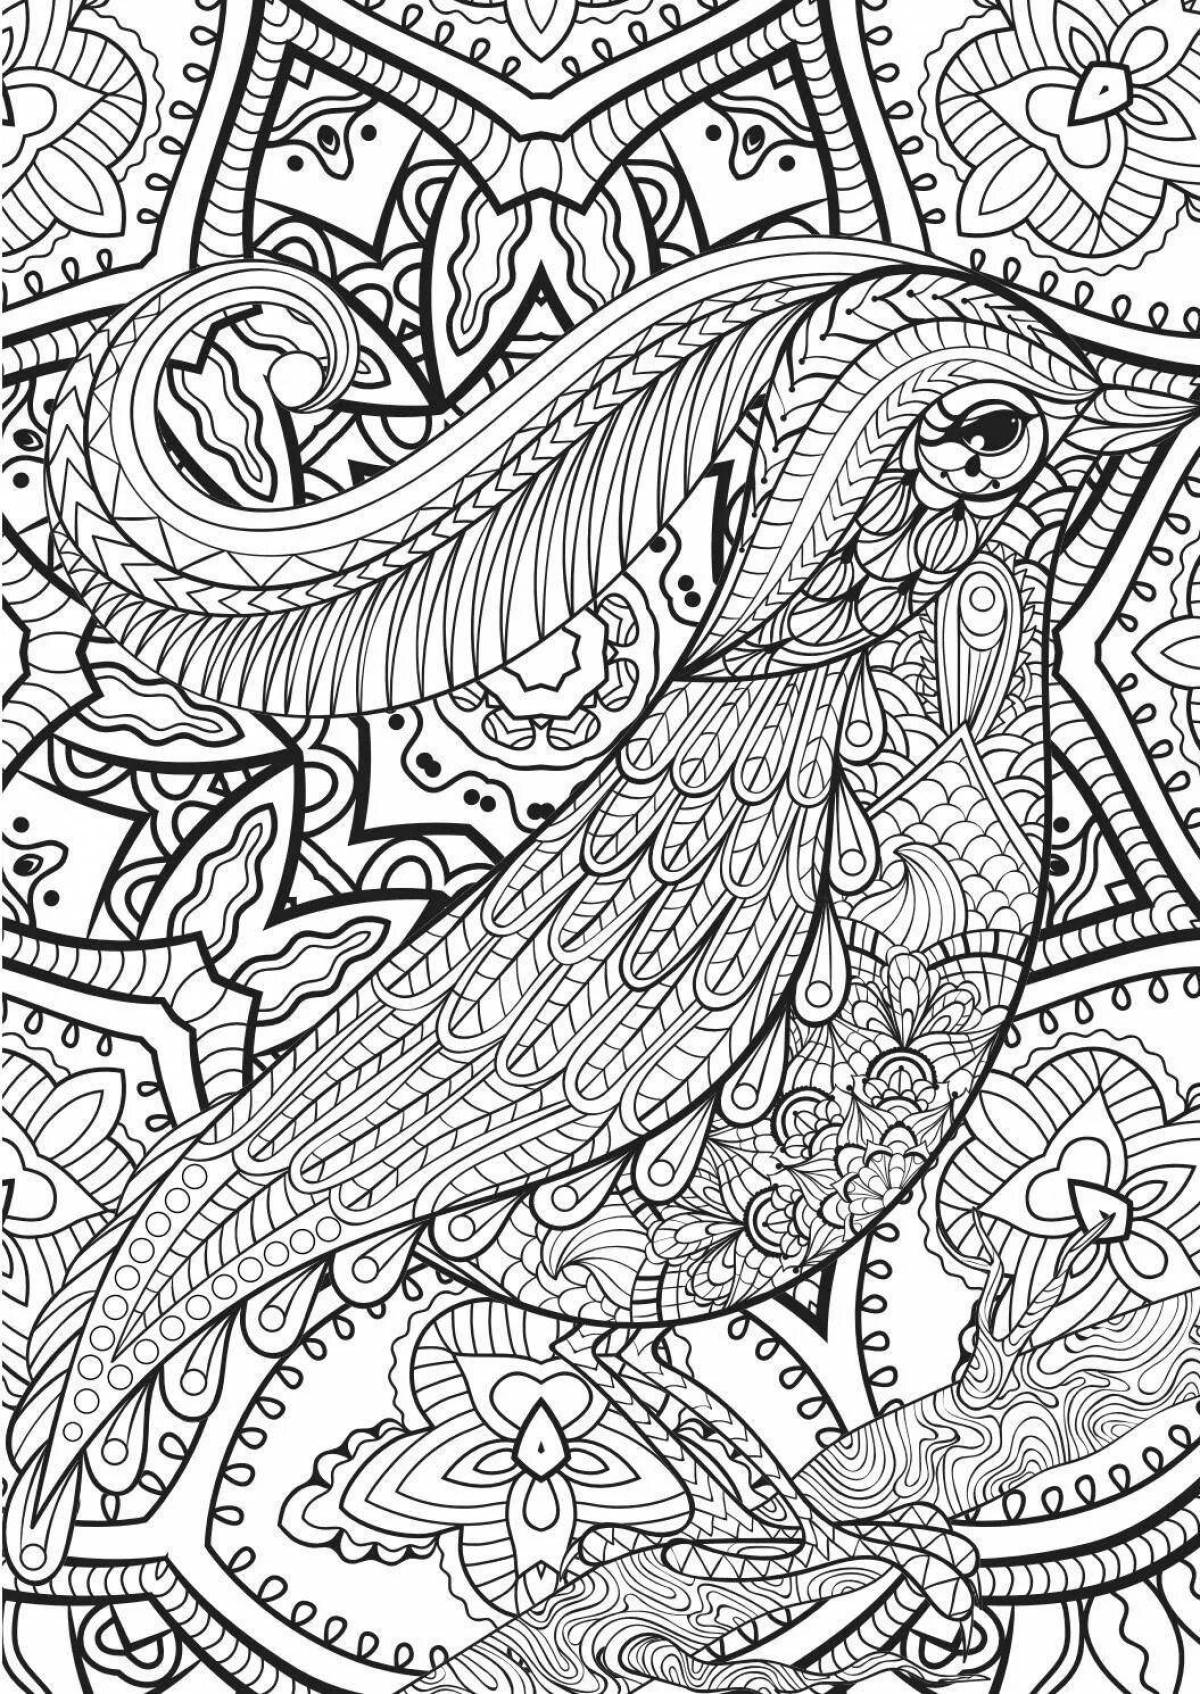 Relaxing anti-stress coloring app page